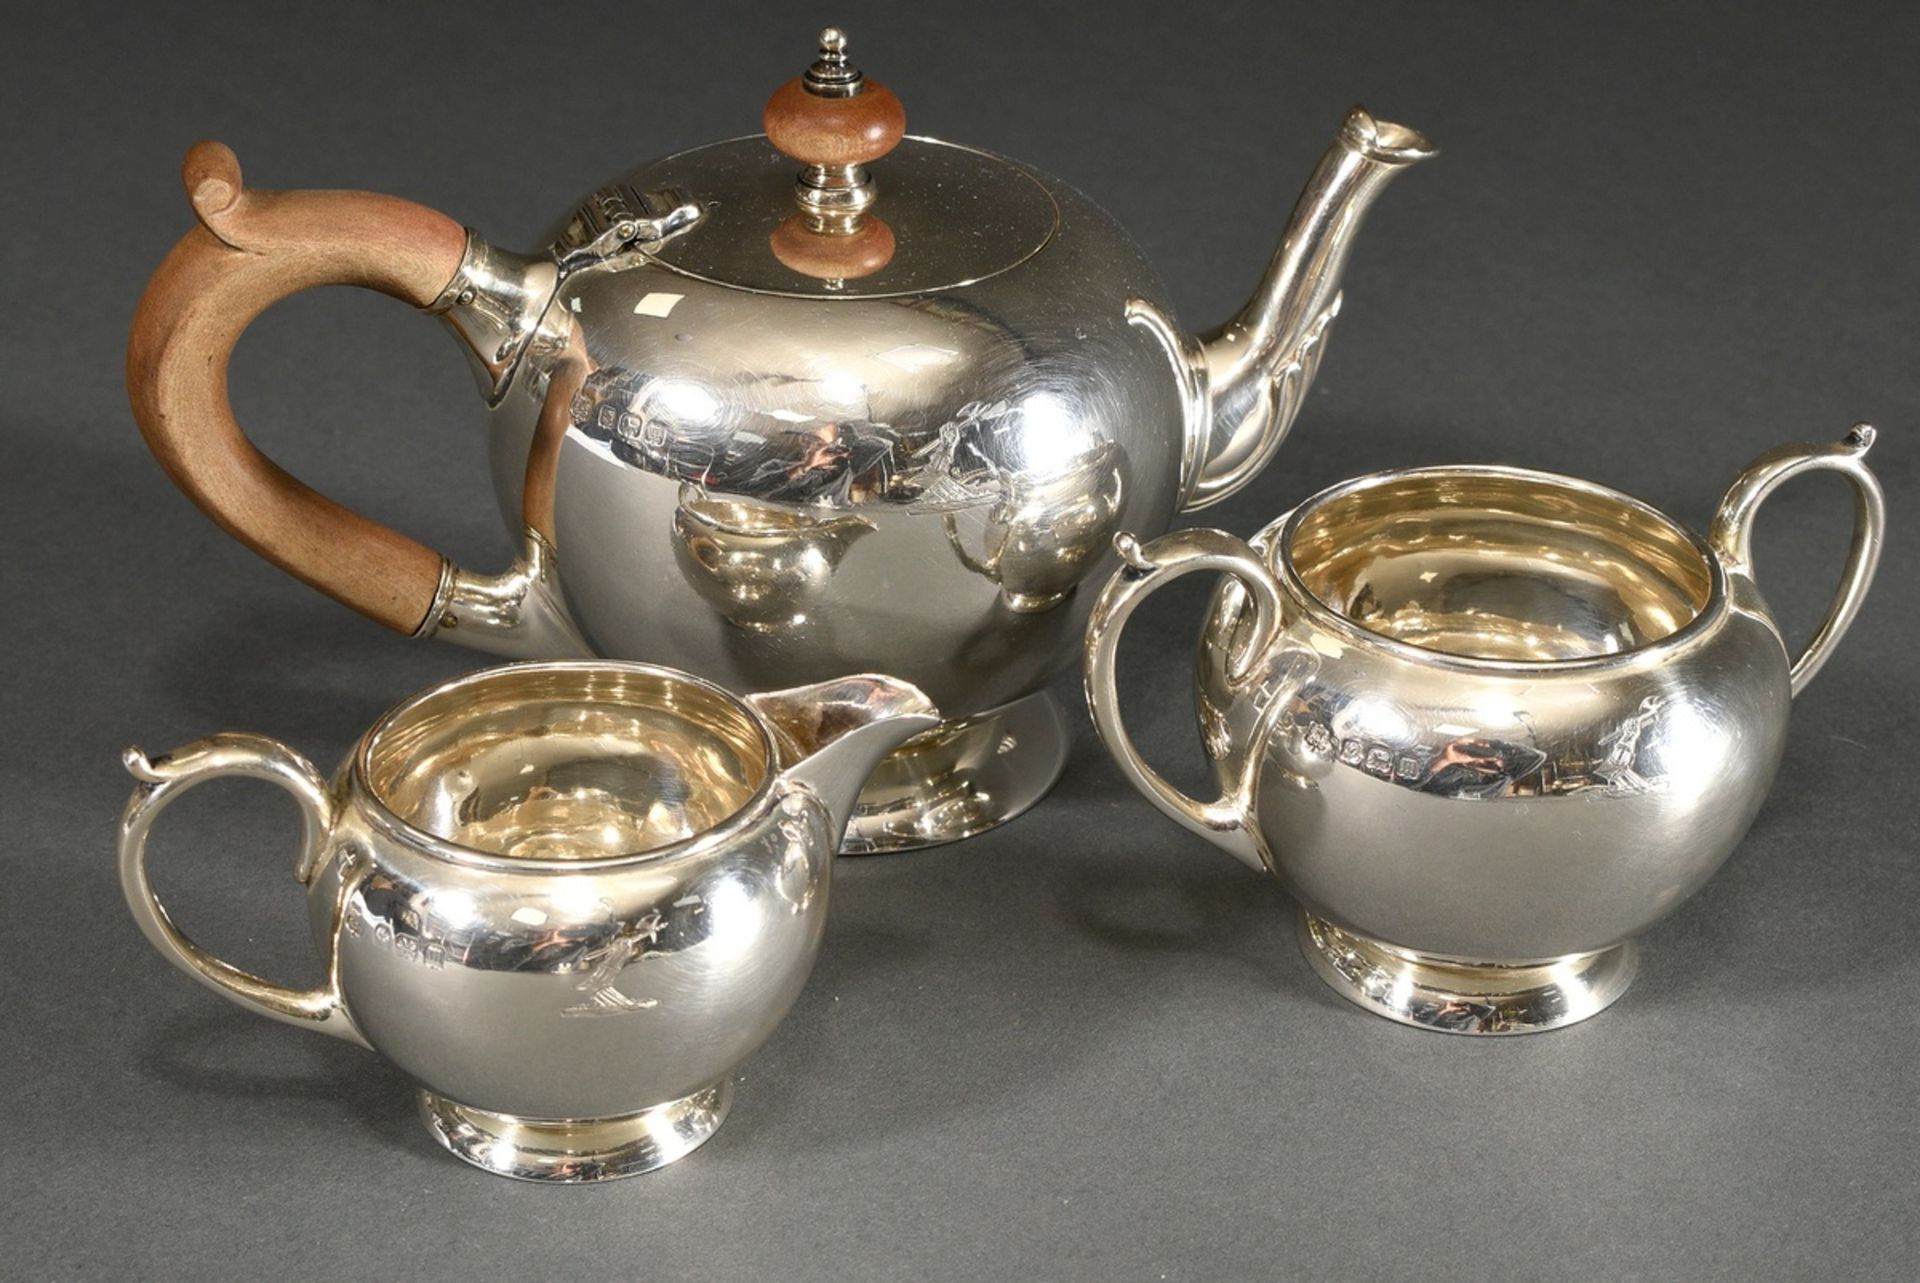 3 Pieces English tea set in George II form: teapot with wooden handle and two parts sugar and cream - Image 2 of 6